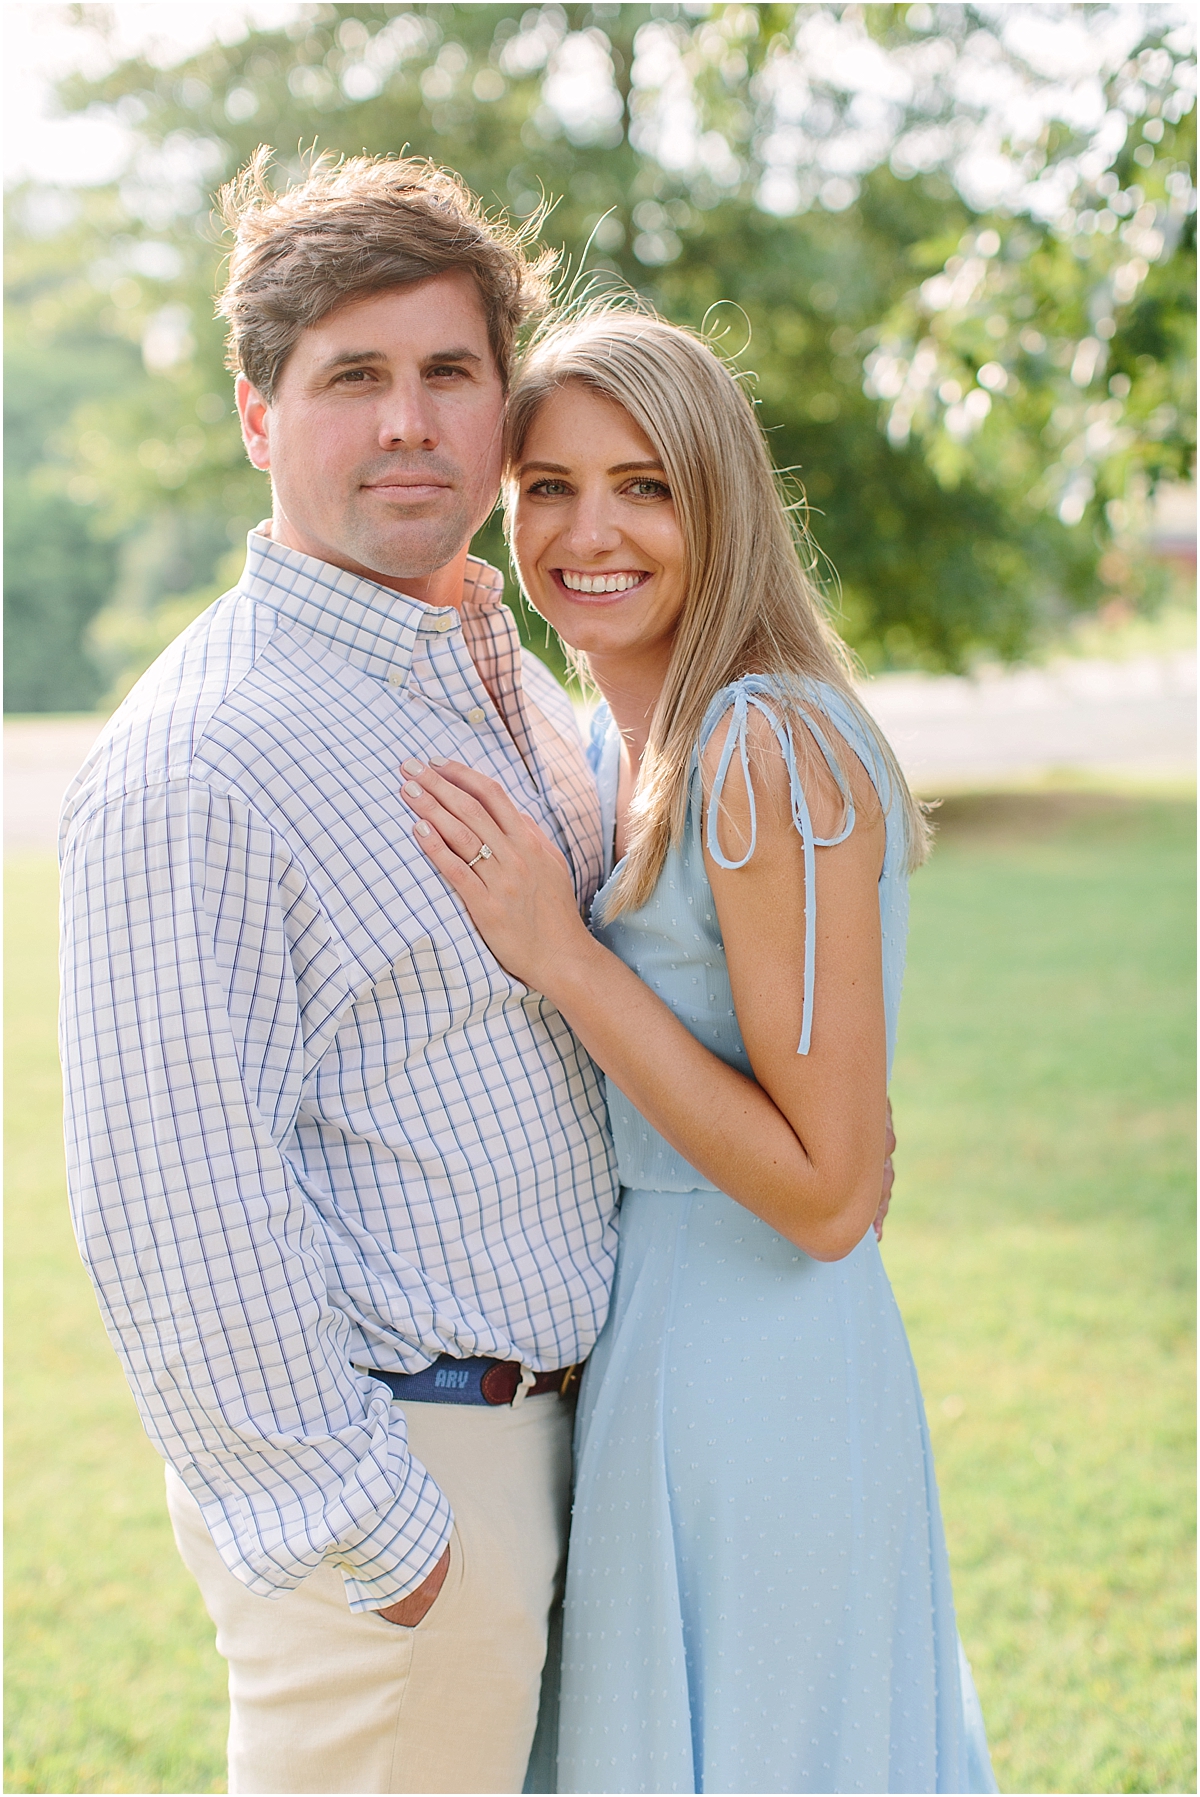  Libby Hill Engagement Session, Nicki Metcalf Photography